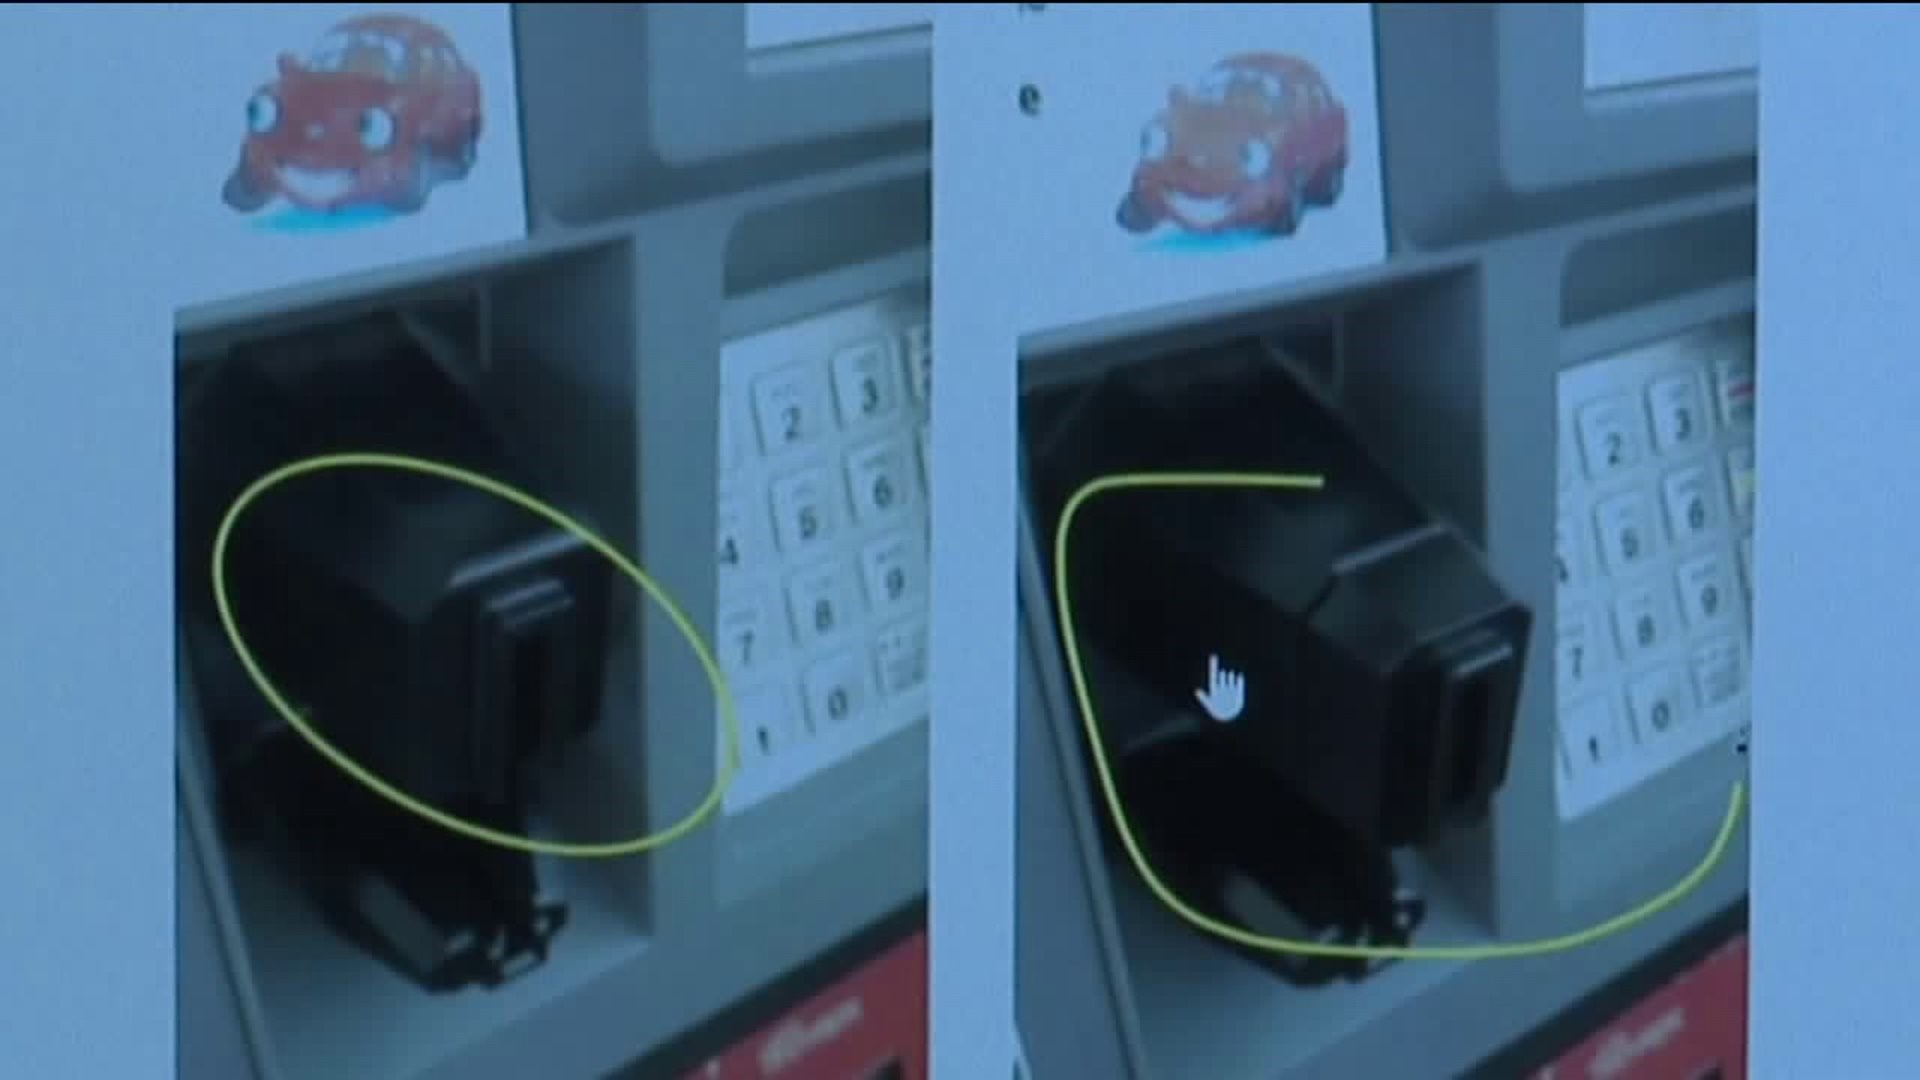 St. Clair Police Chief Gives Tips on How to Prevent Card Skimming